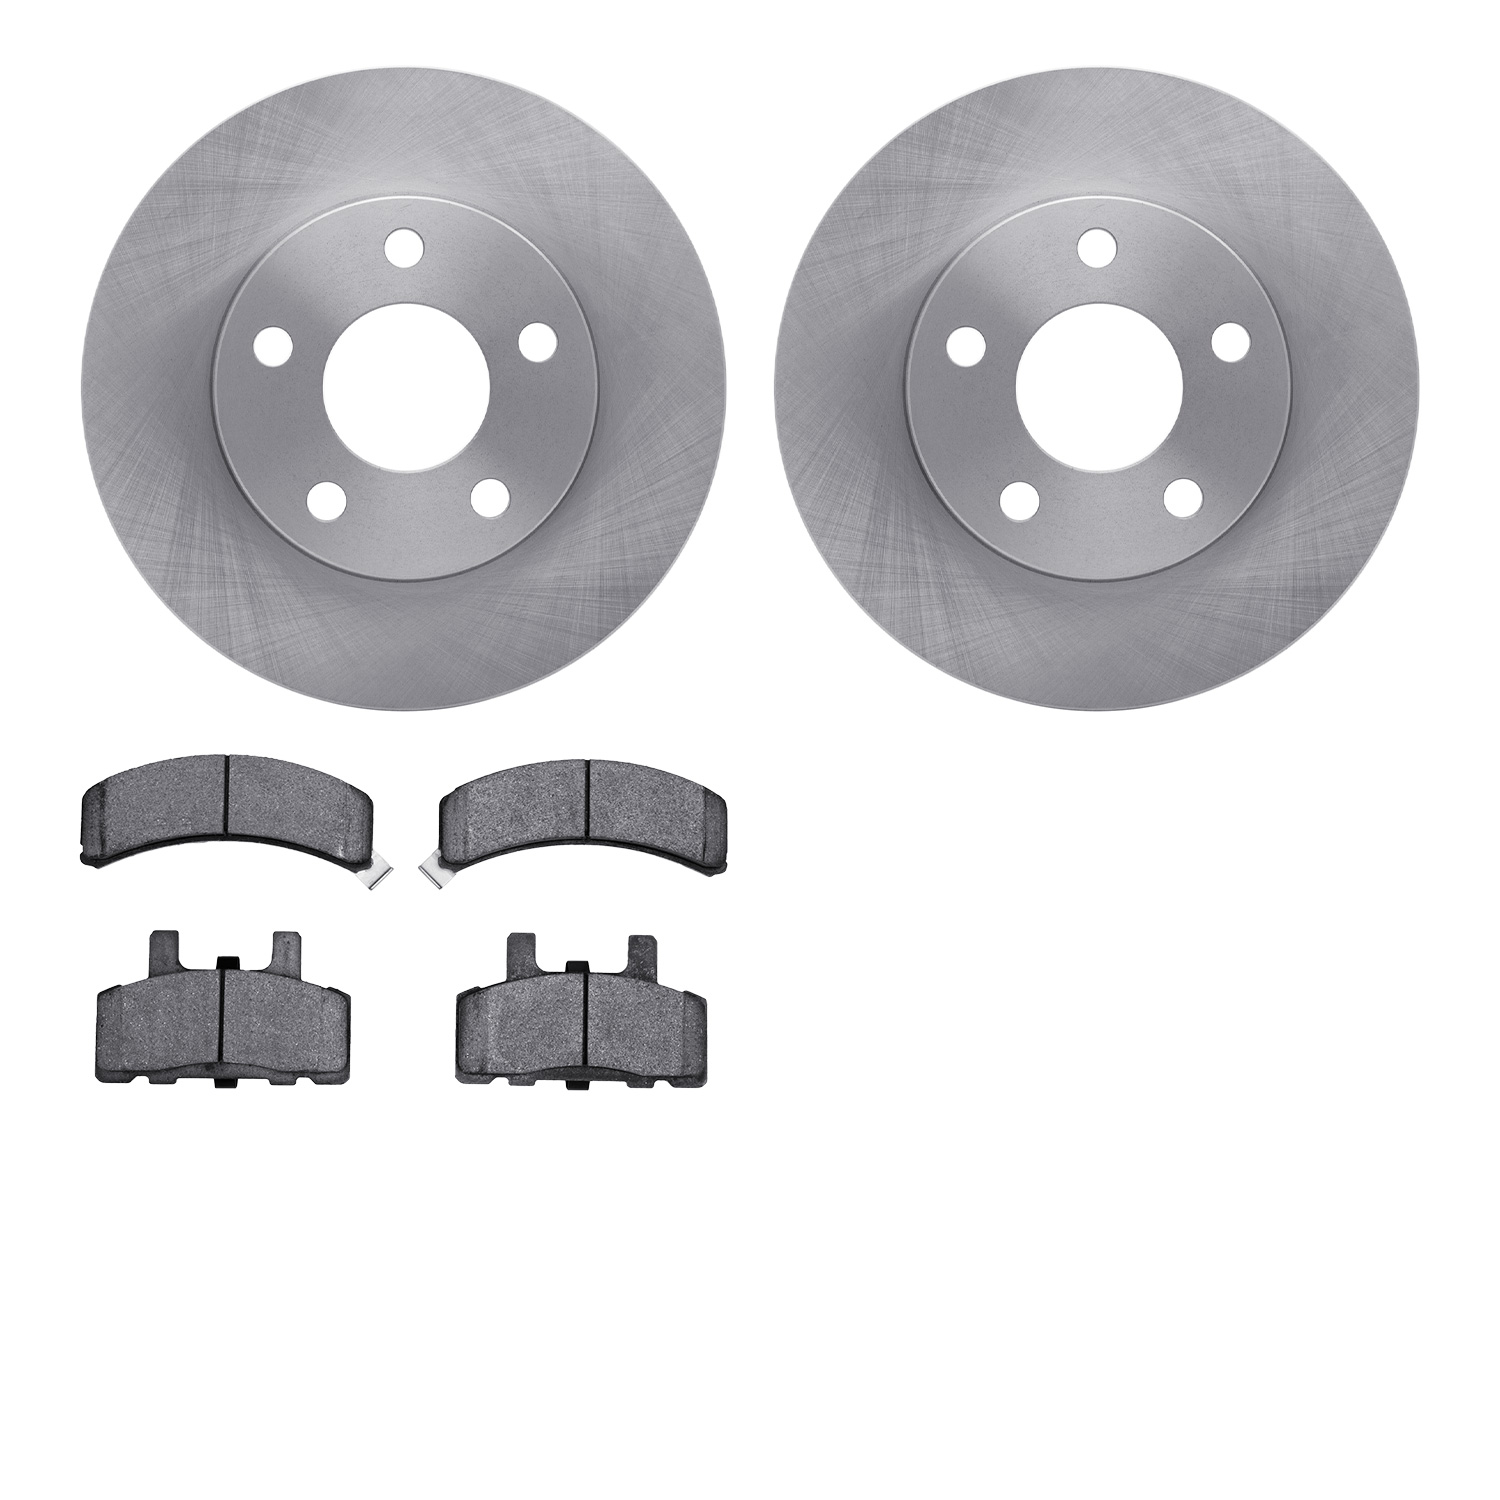 6402-47019 Brake Rotors with Ultimate-Duty Brake Pads, 1990-1993 GM, Position: Front